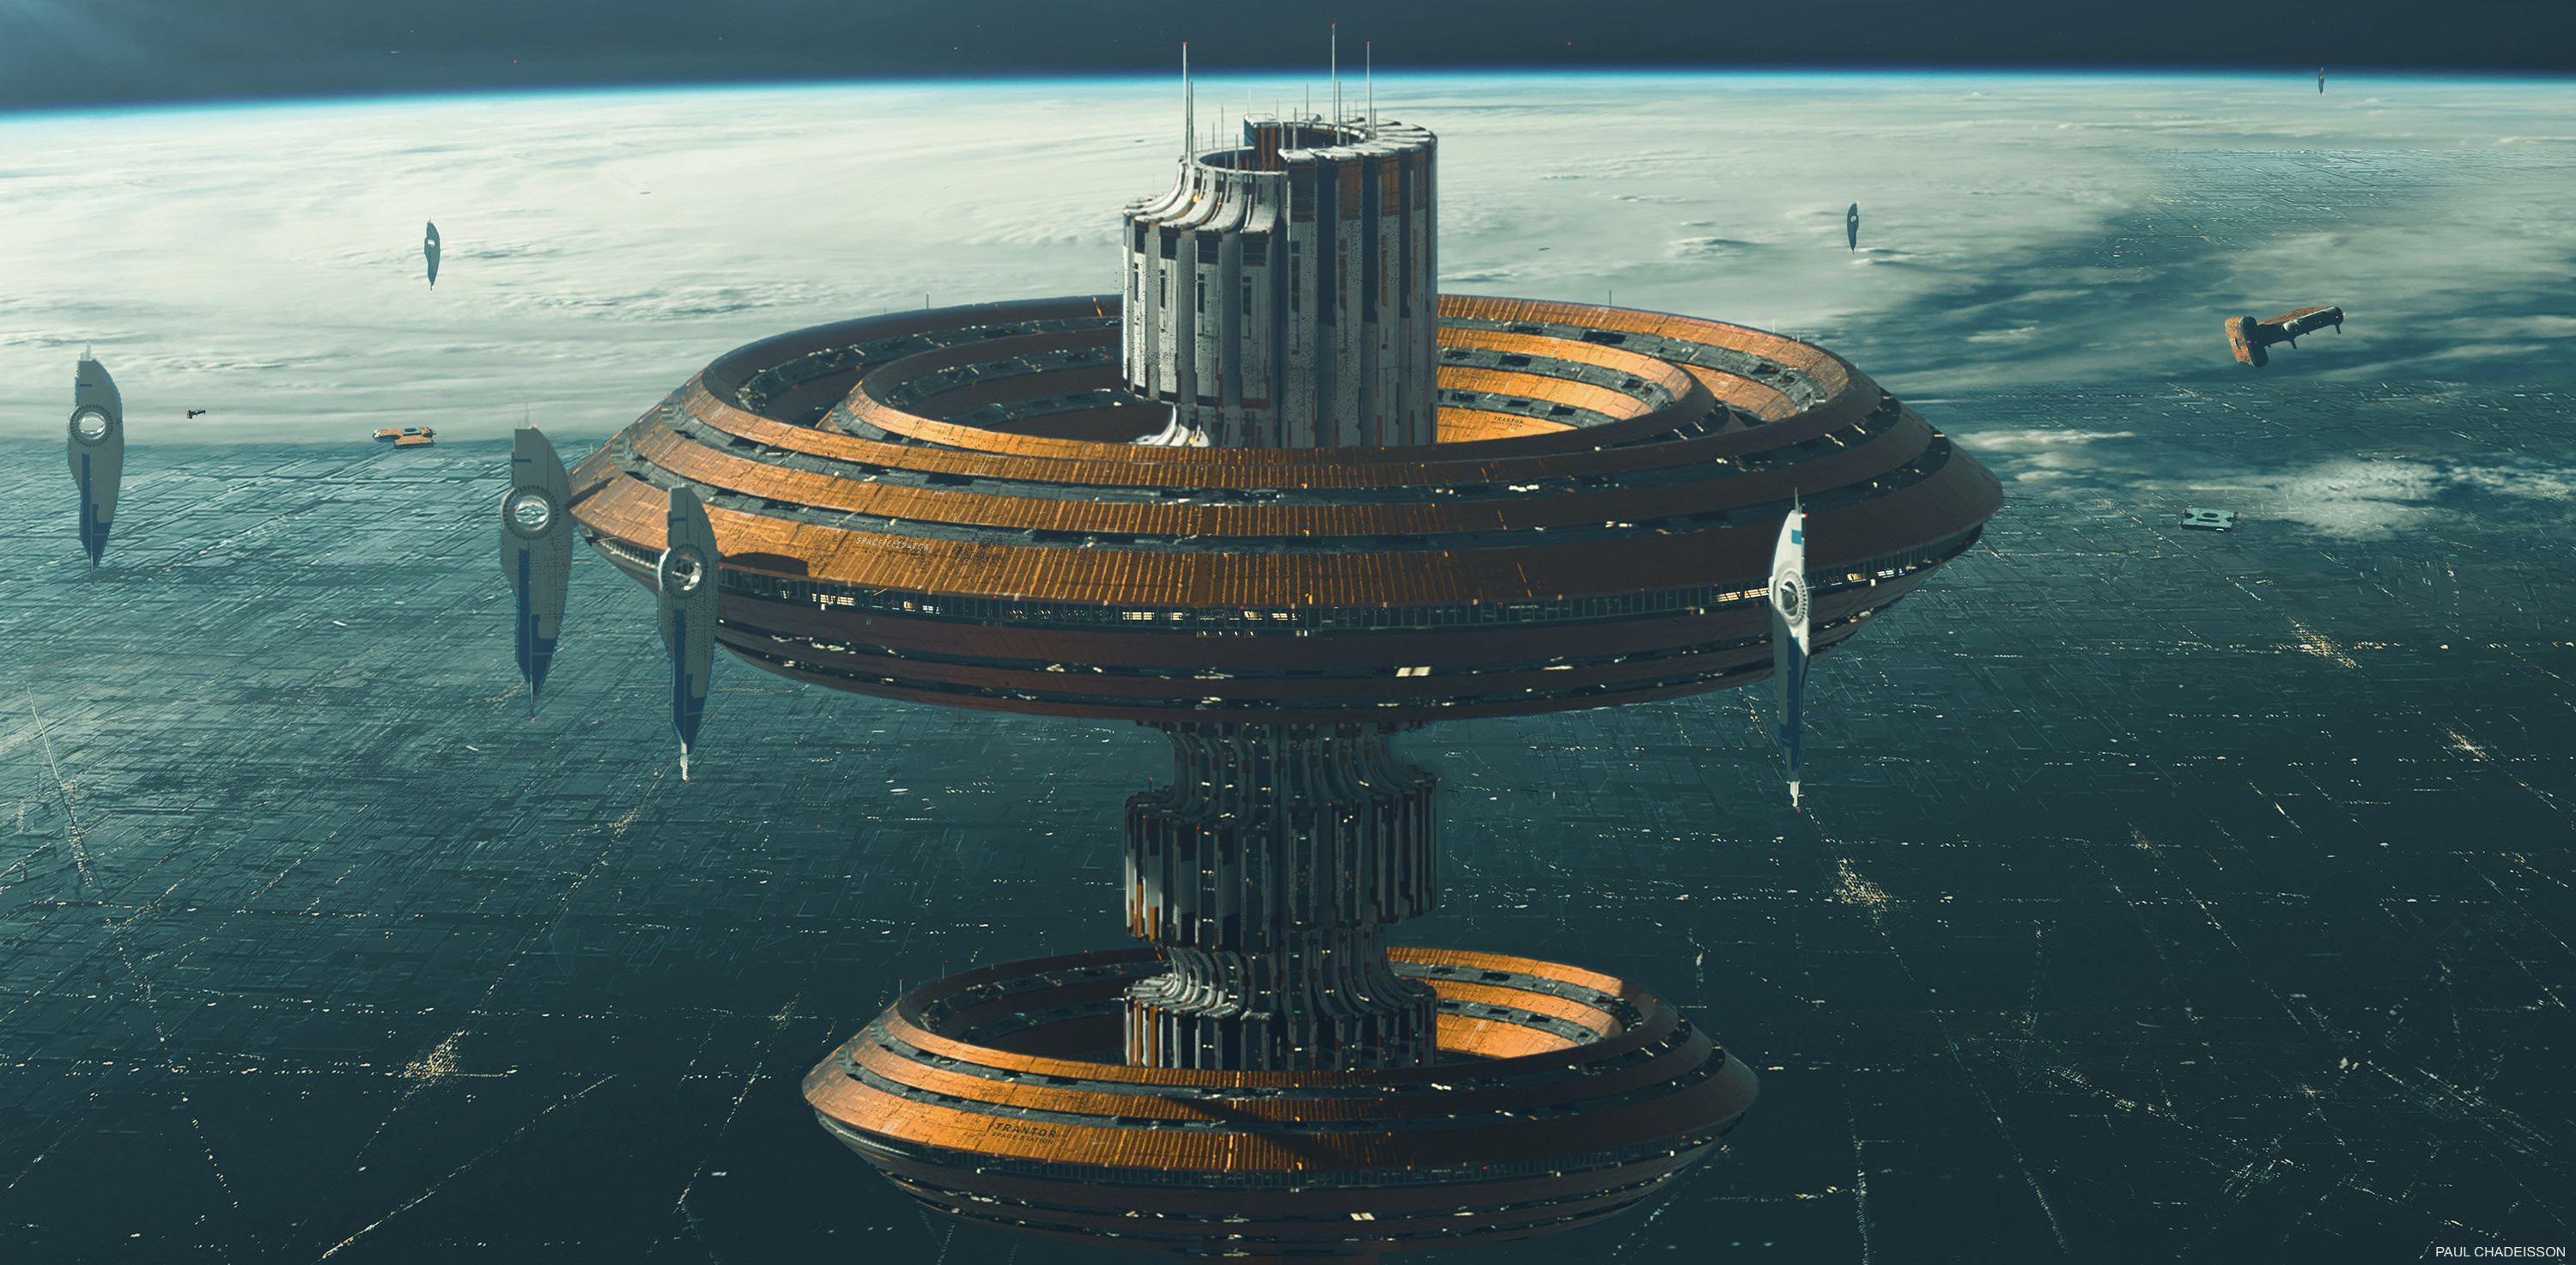 Foundation (TV Series): The Star Bridge, A space elevator linking the planet Trantor to the orbiting Trantor Station. 3000x1480 Dual Screen Wallpaper.